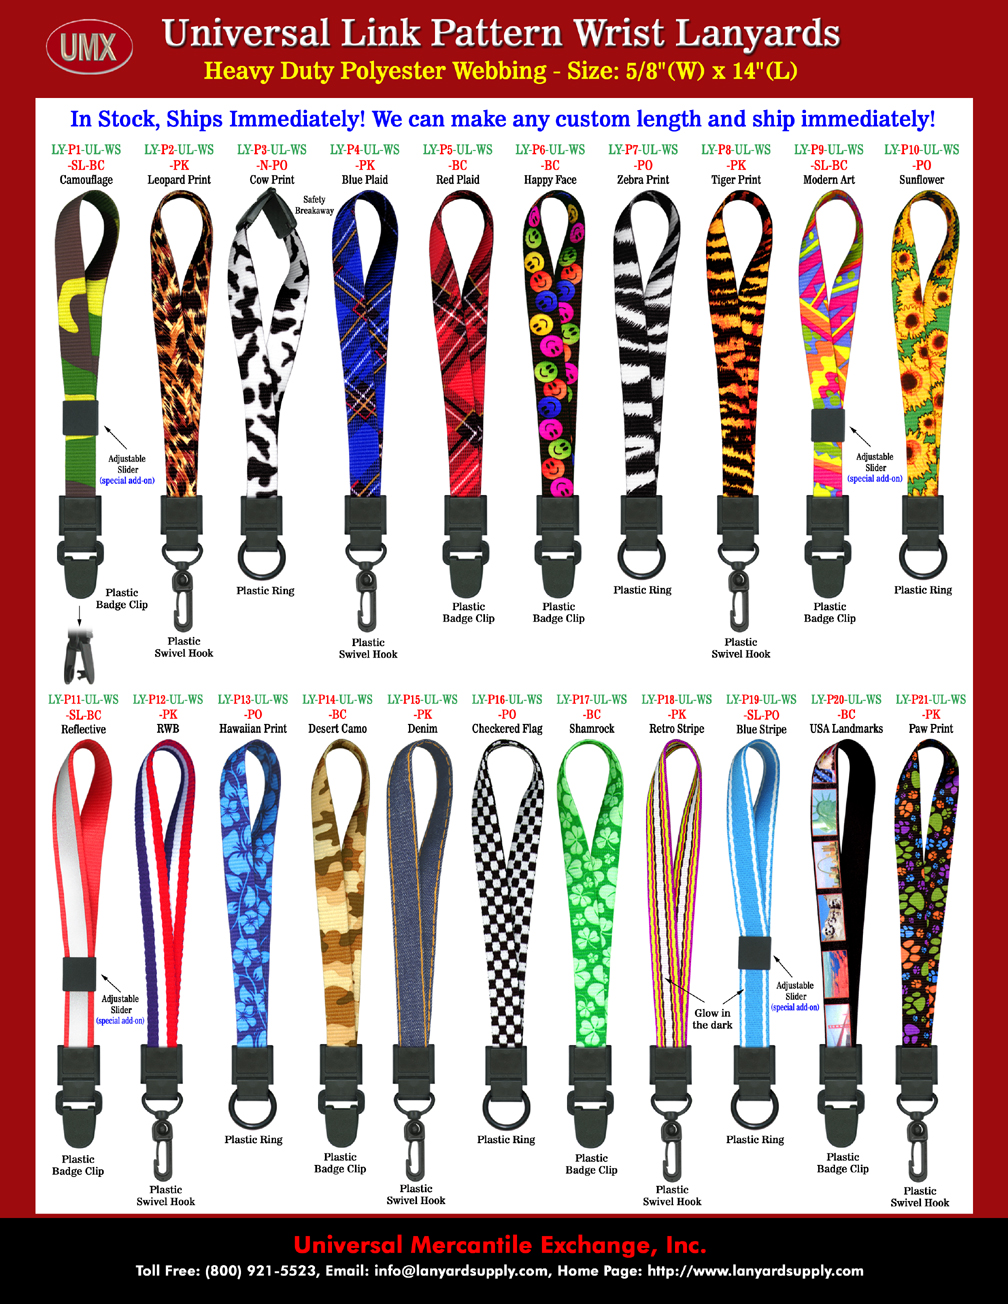 Universal Link: 5/8" Unique Designed Scan-Free Pre-Printed Wrist Lanyards